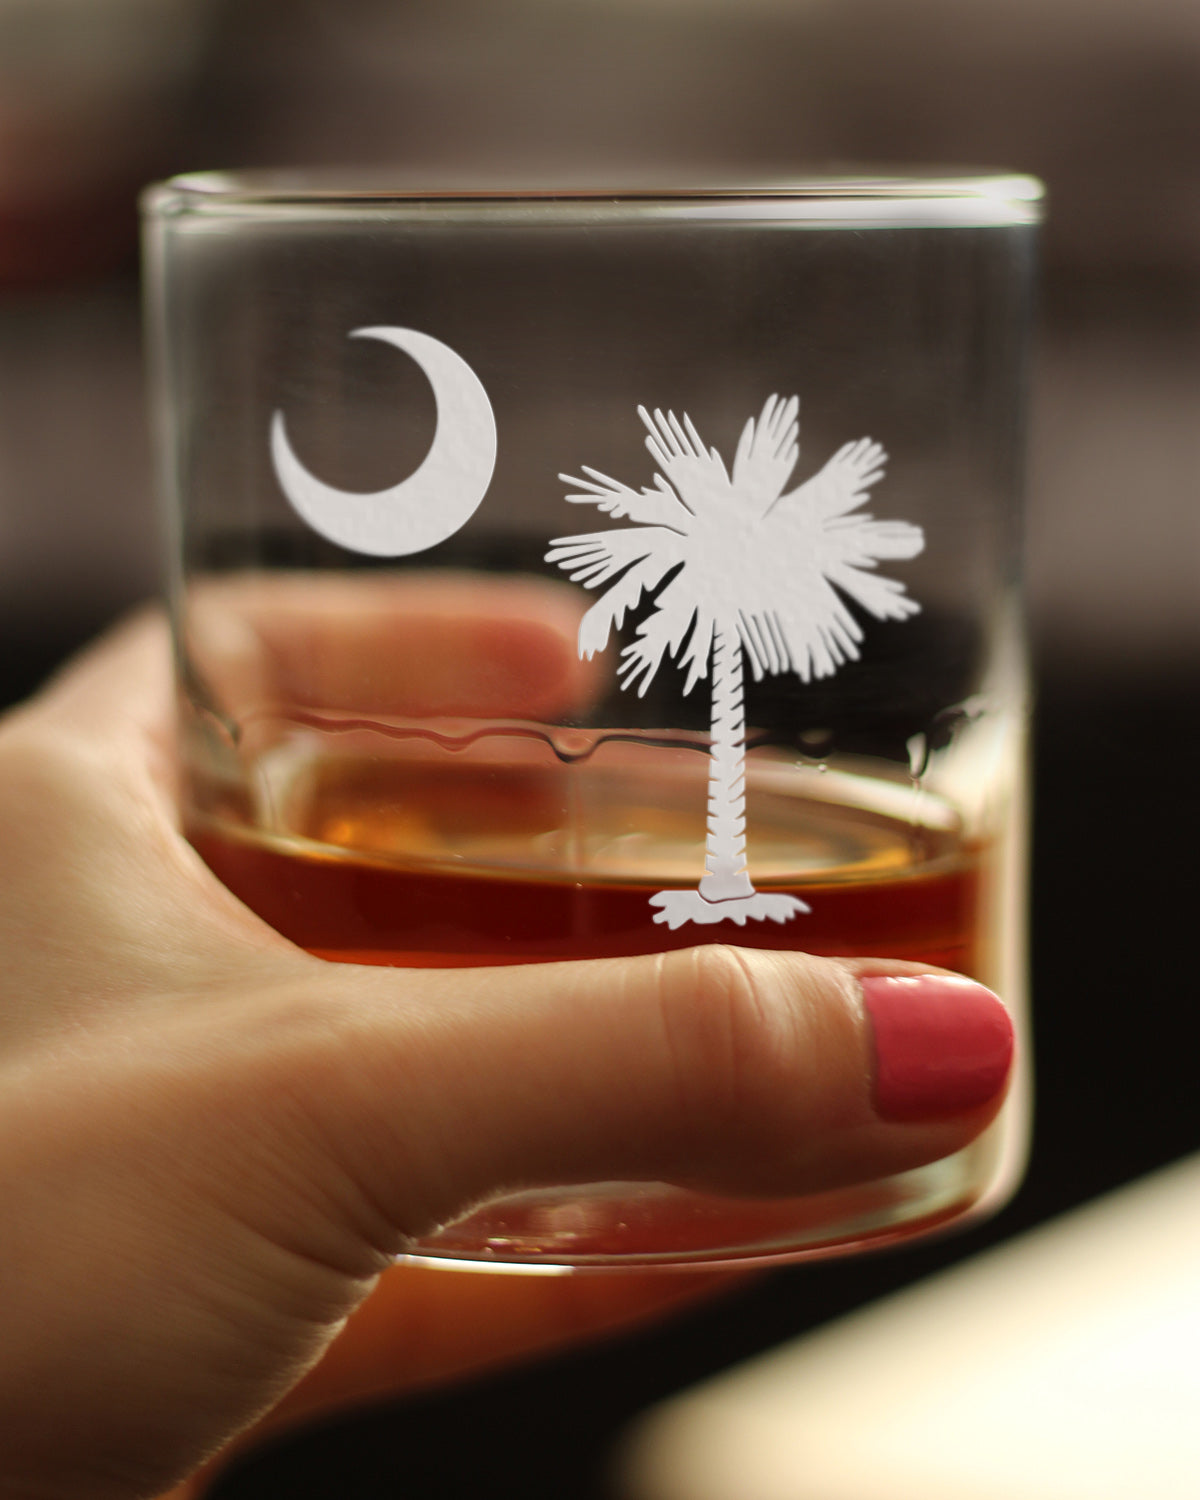 South Carolina Flag Whiskey Rocks Glass - State Themed Drinking Decor and Gifts for South Carolinian Women &amp; Men - 10.25 Oz Whisky Tumbler Glasses